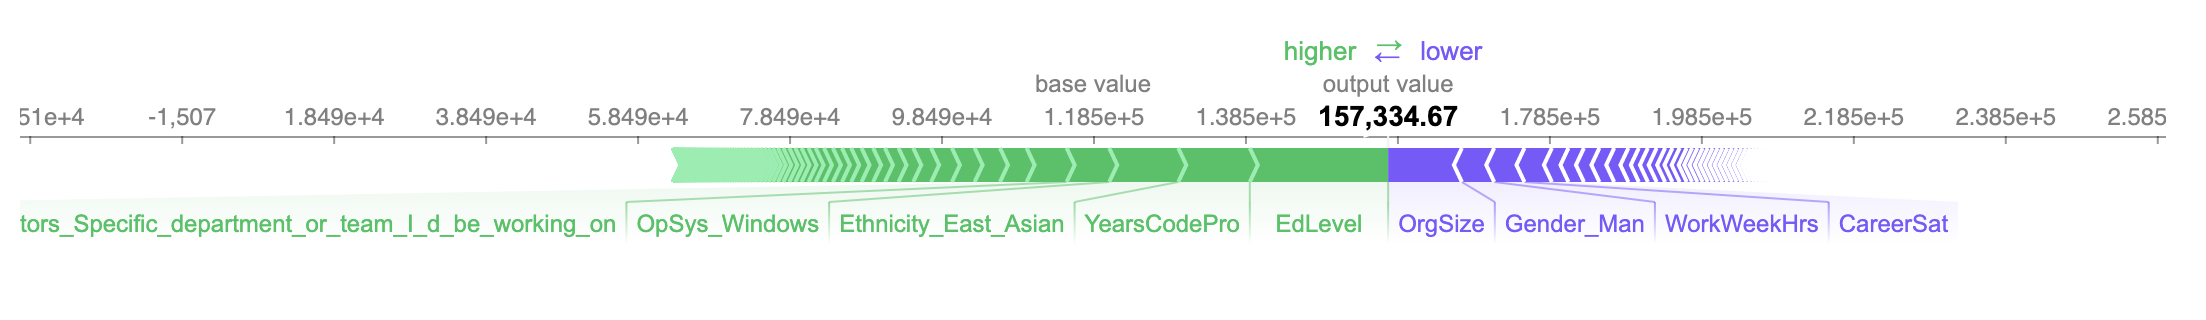 Using Python SHAP to visualize the explanation of predicted salary of one developer<br />
